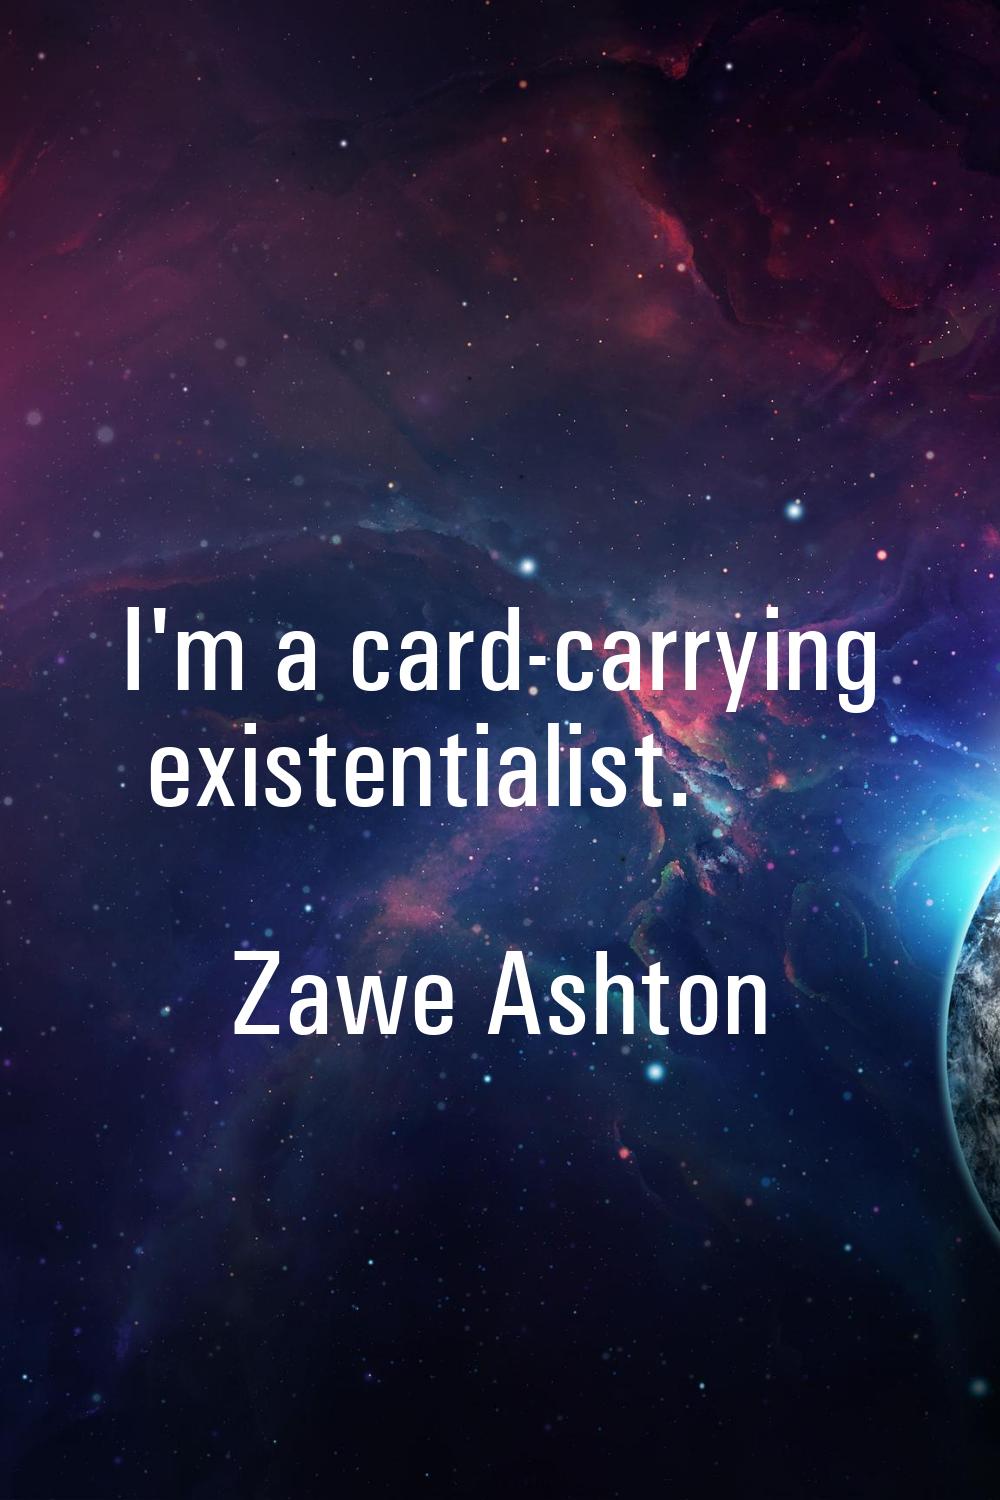 I'm a card-carrying existentialist.